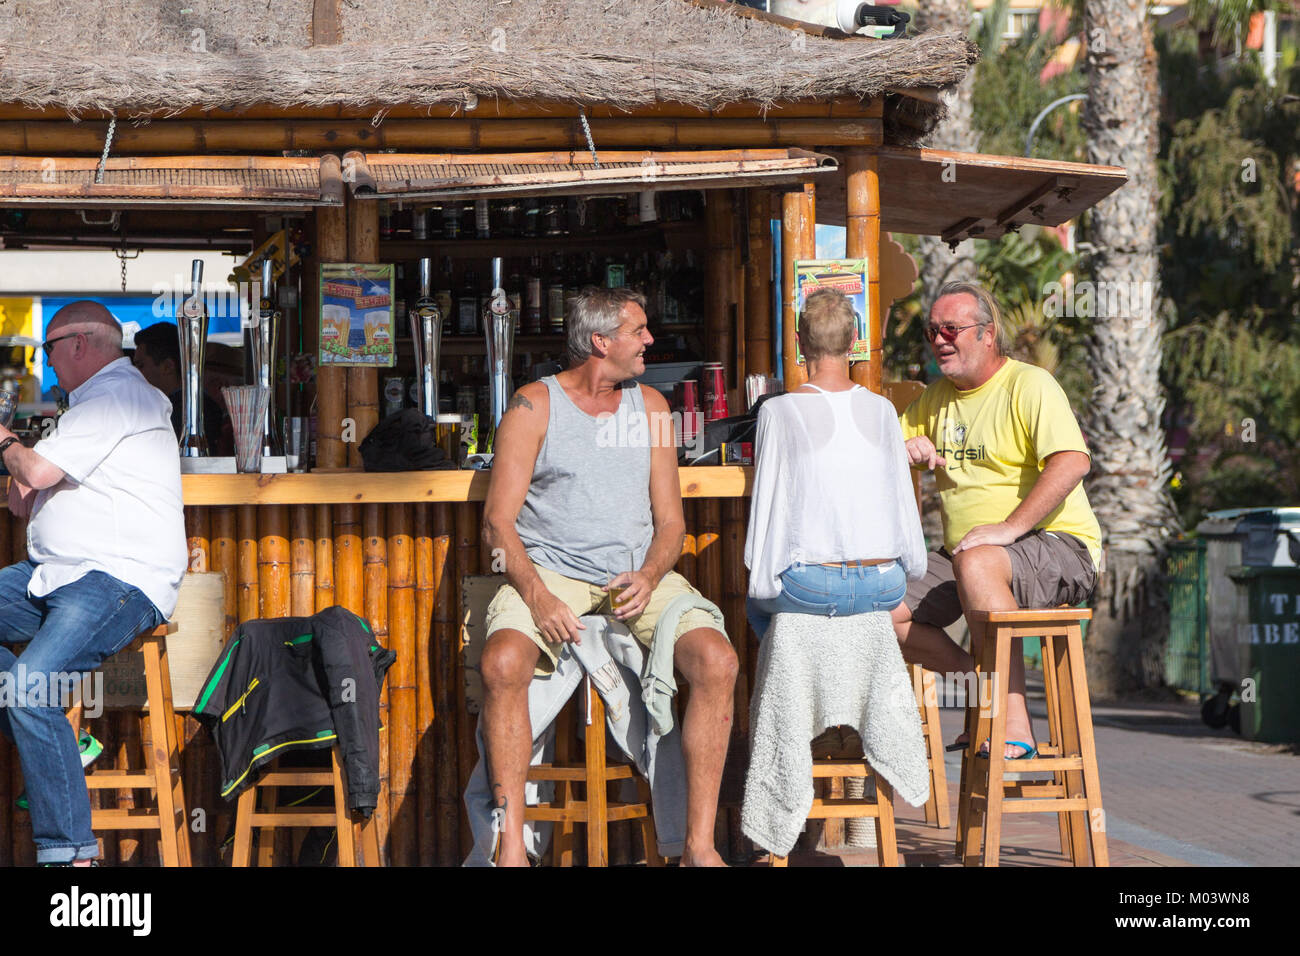 Tiki Beach Bar, Levante Beach, Benidorm, Costa Blanca, Spain, 18 January 2018. British holidaymakers escape the cold weather in the UK. Tourists and locals enjoy the winter sun and daytime temperatures in the high 20's Celsius at the beachfront Tiki Bar. Credit: Mick Flynn/Alamy Live News Stock Photo